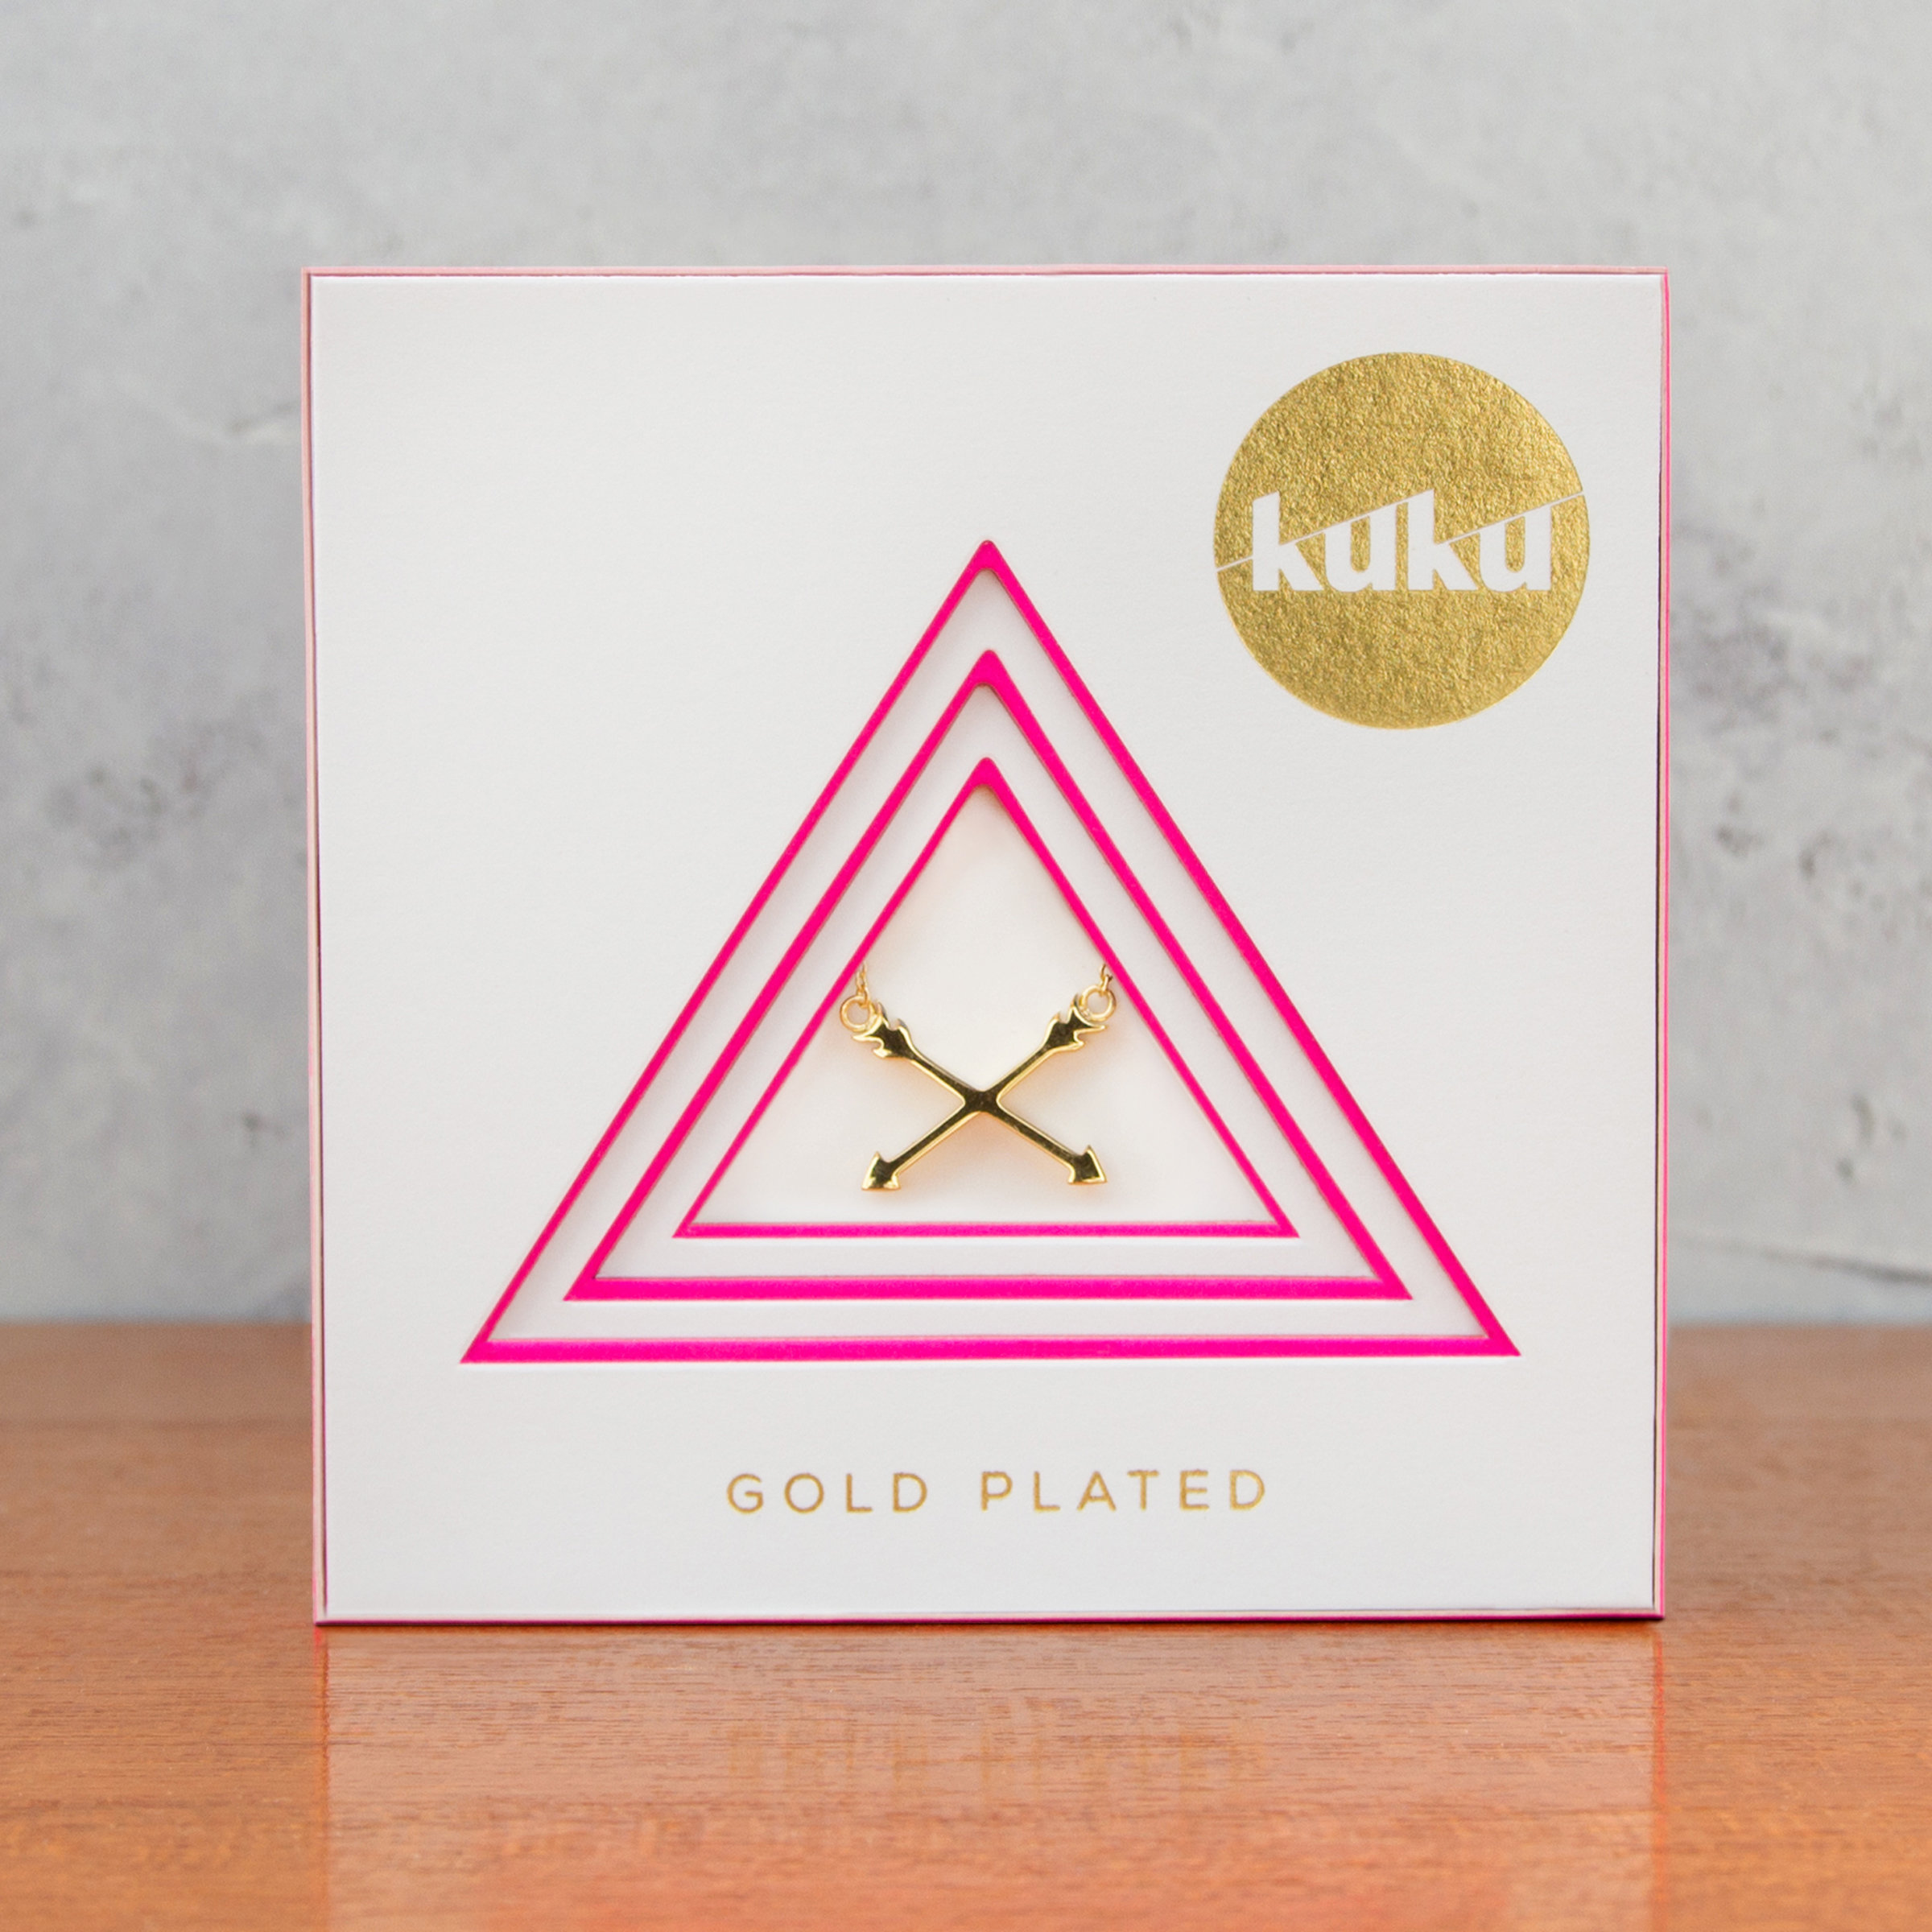 Kuku gold arrow necklace in packaging